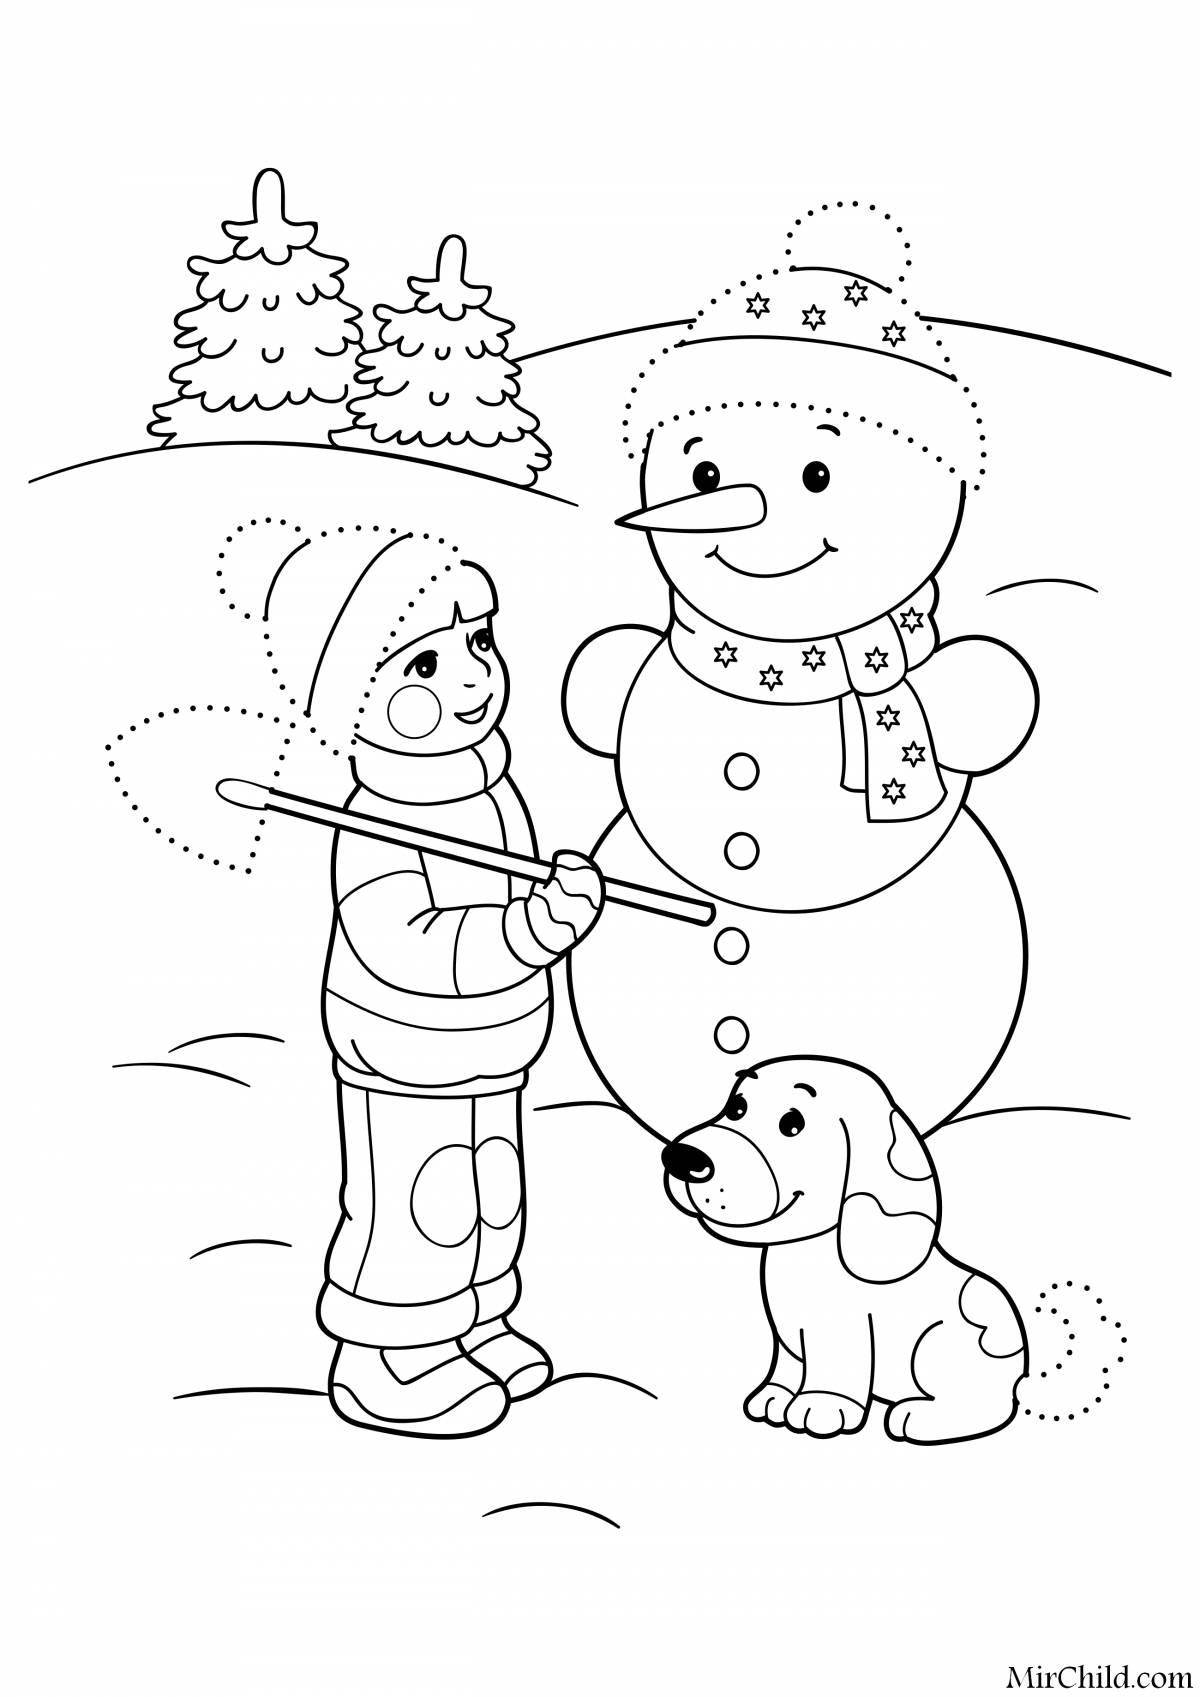 Amazing winter coloring book for kids 4-6 years old